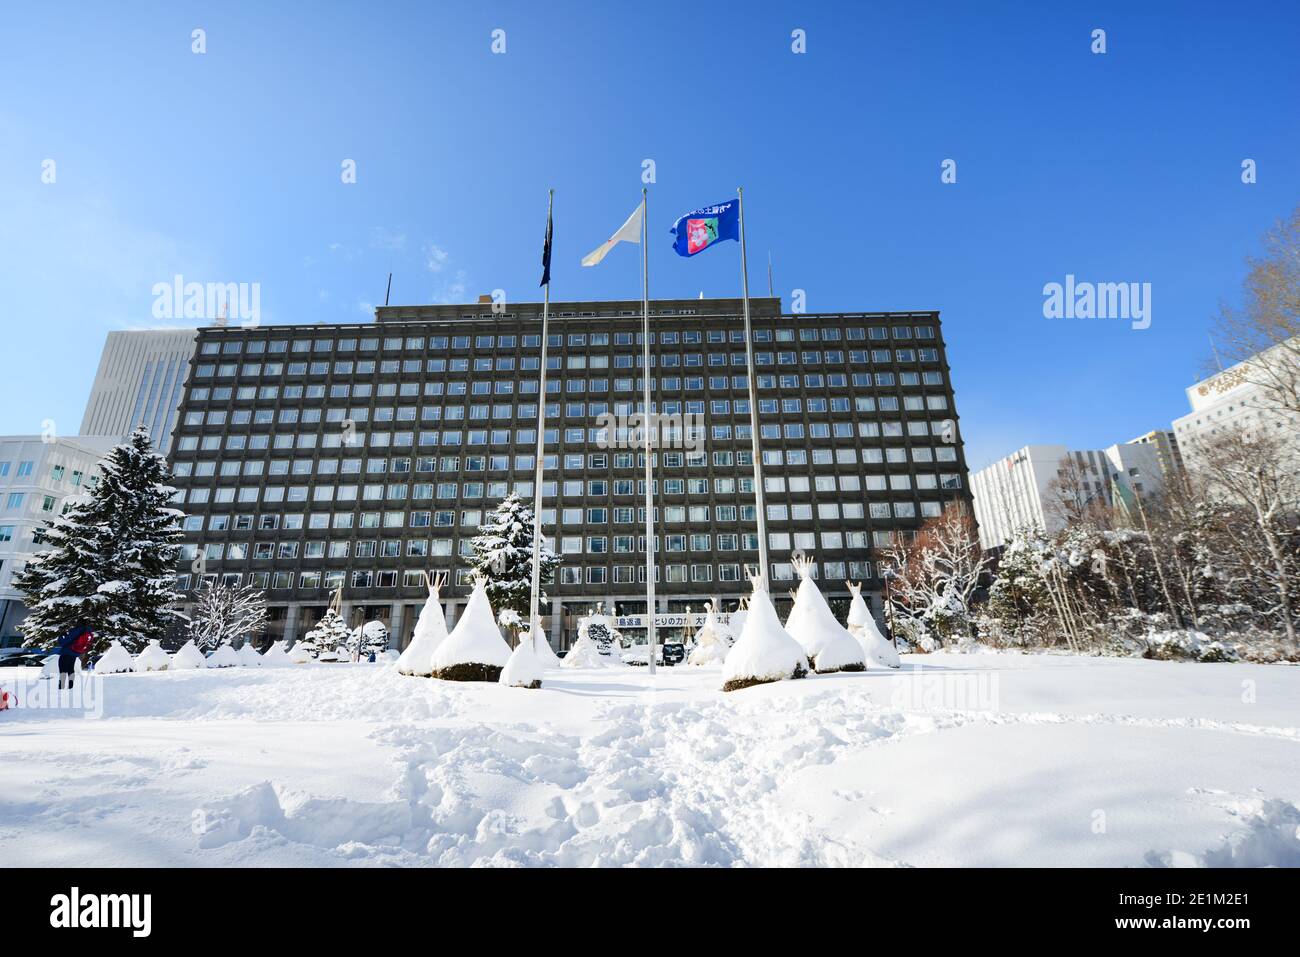 Sapporo's city center after a snowstorm. Stock Photo